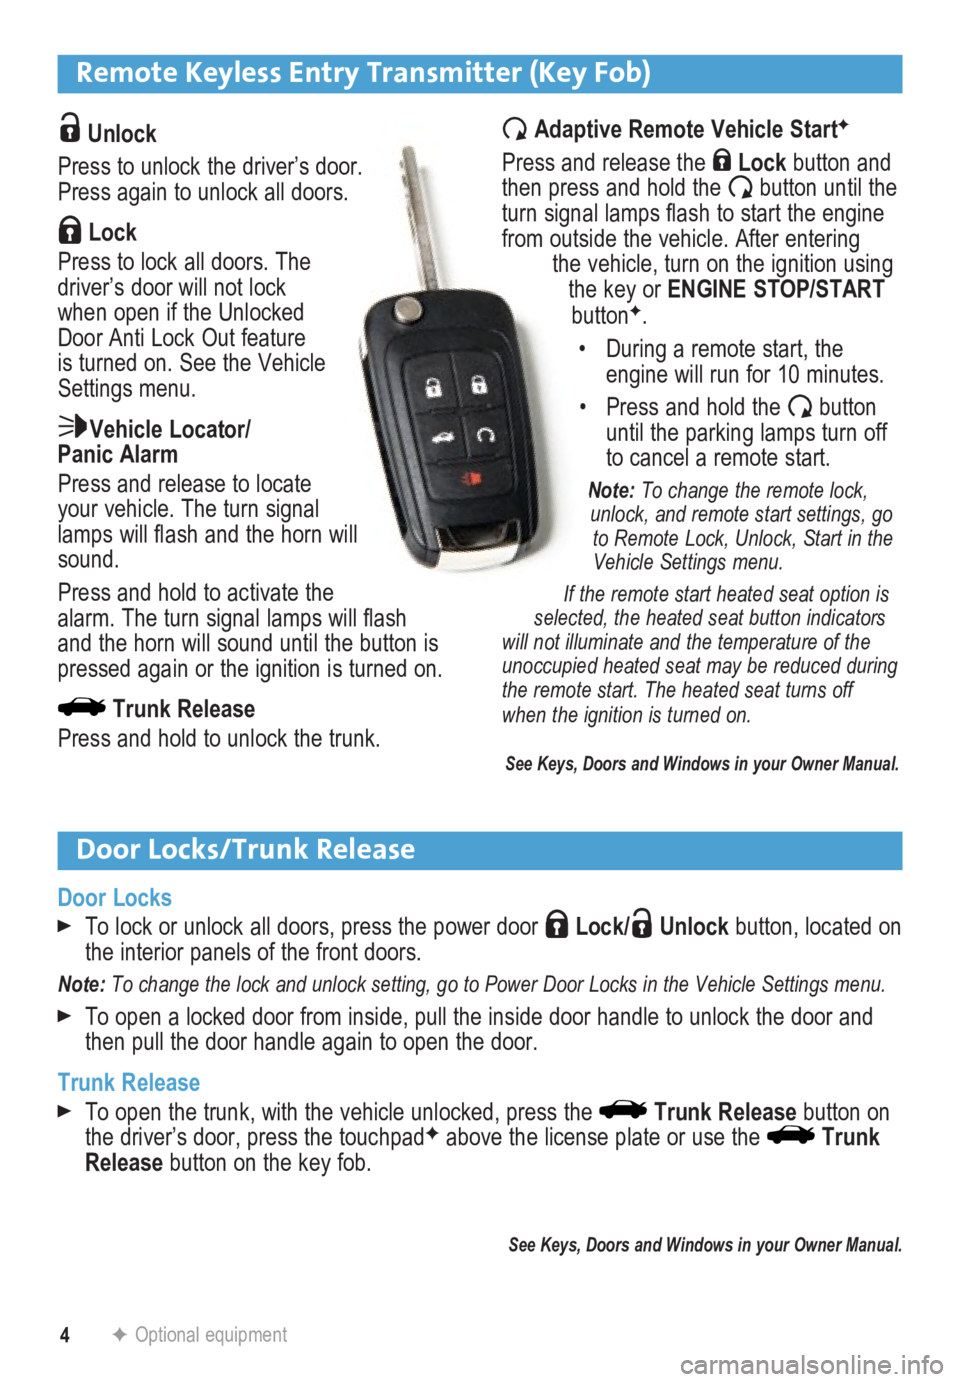 BUICK LACROSSE 2014  Get To Know Guide 4
Remote Keyless Entry Transmitter (Key Fob) 
F Optional equipment
 Unlock 
Press to unlock the driver’s door. 
Press again to unlock all doors.
 Lock
Press to lock all doors. The 
driver’s door w